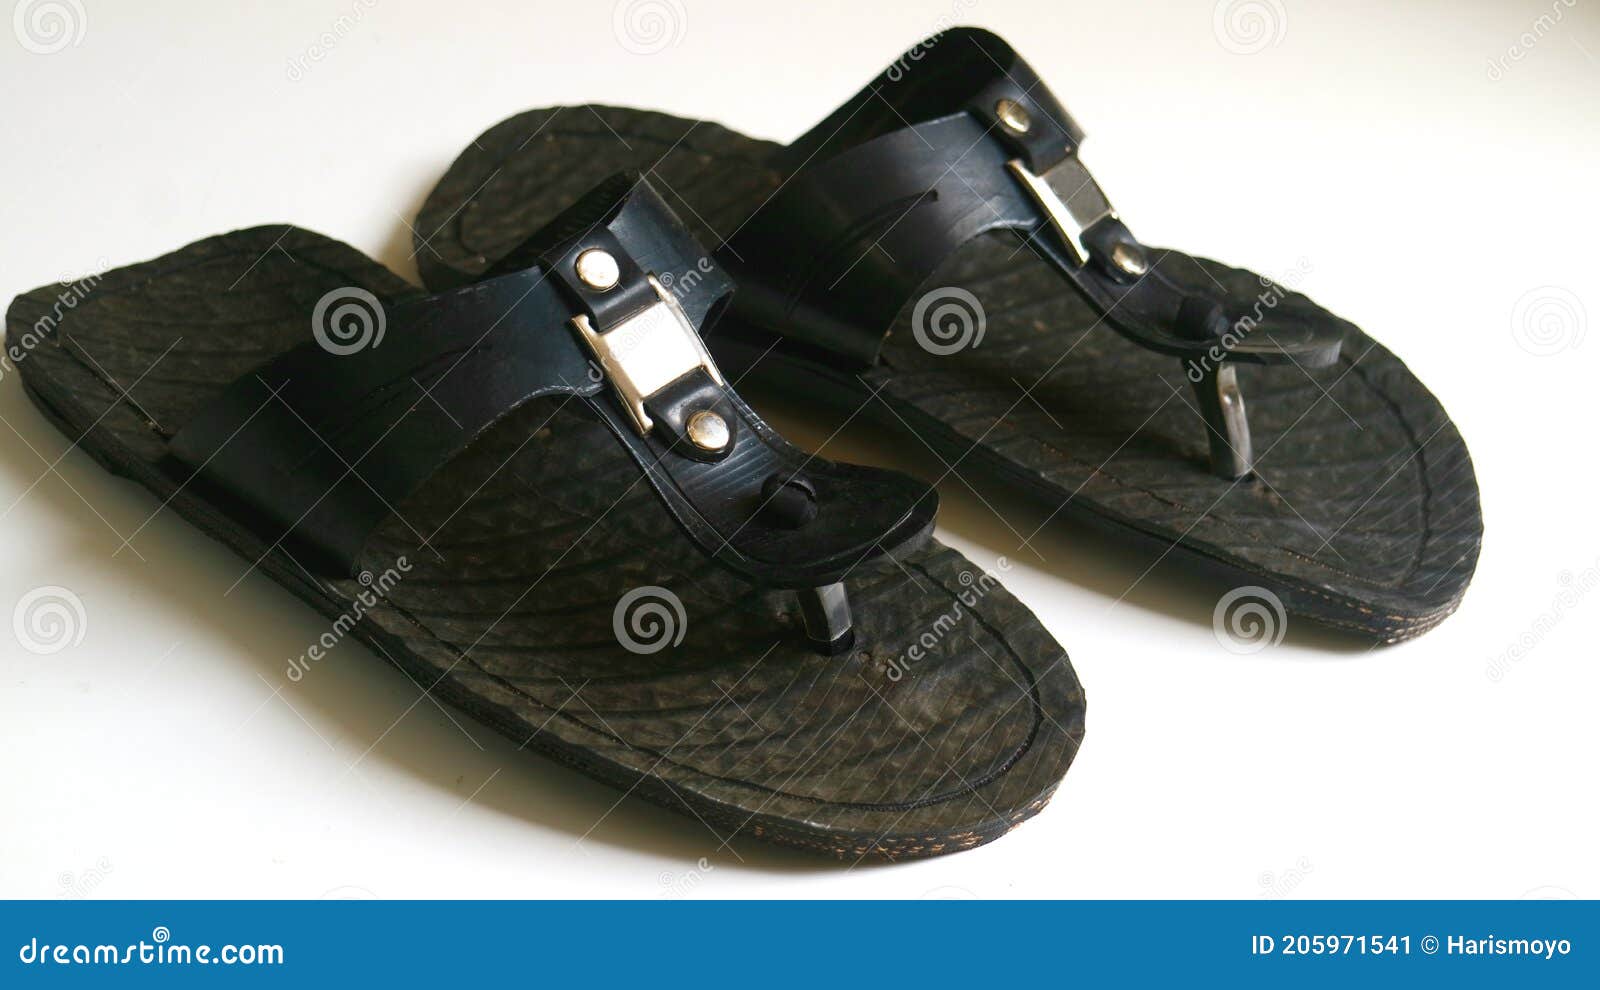 Recycled tires sandal stock image. Image of flip, friendly - 205971541